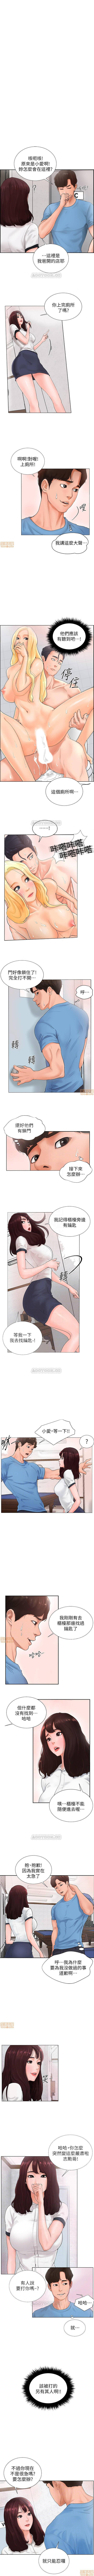 Highschool 撞球甜心 1-29 Pounded - Page 4